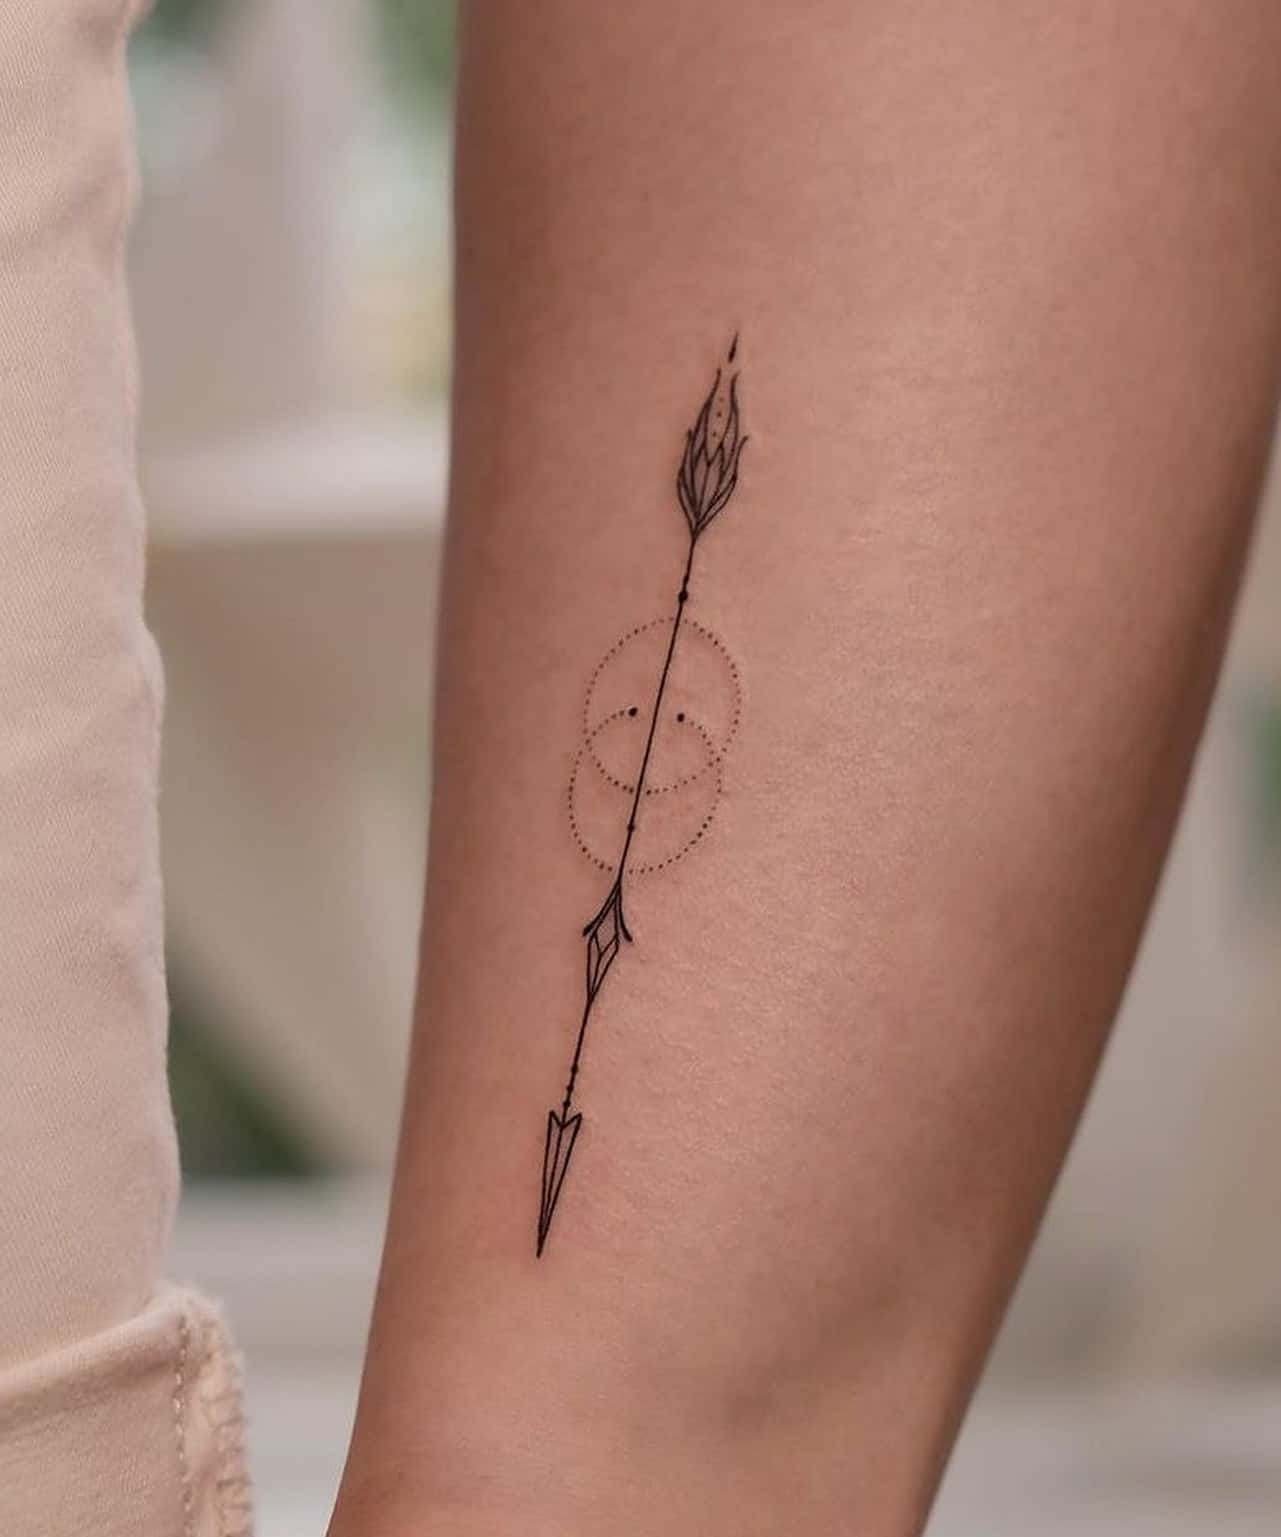 What does an arrow symbolize in a tattoo